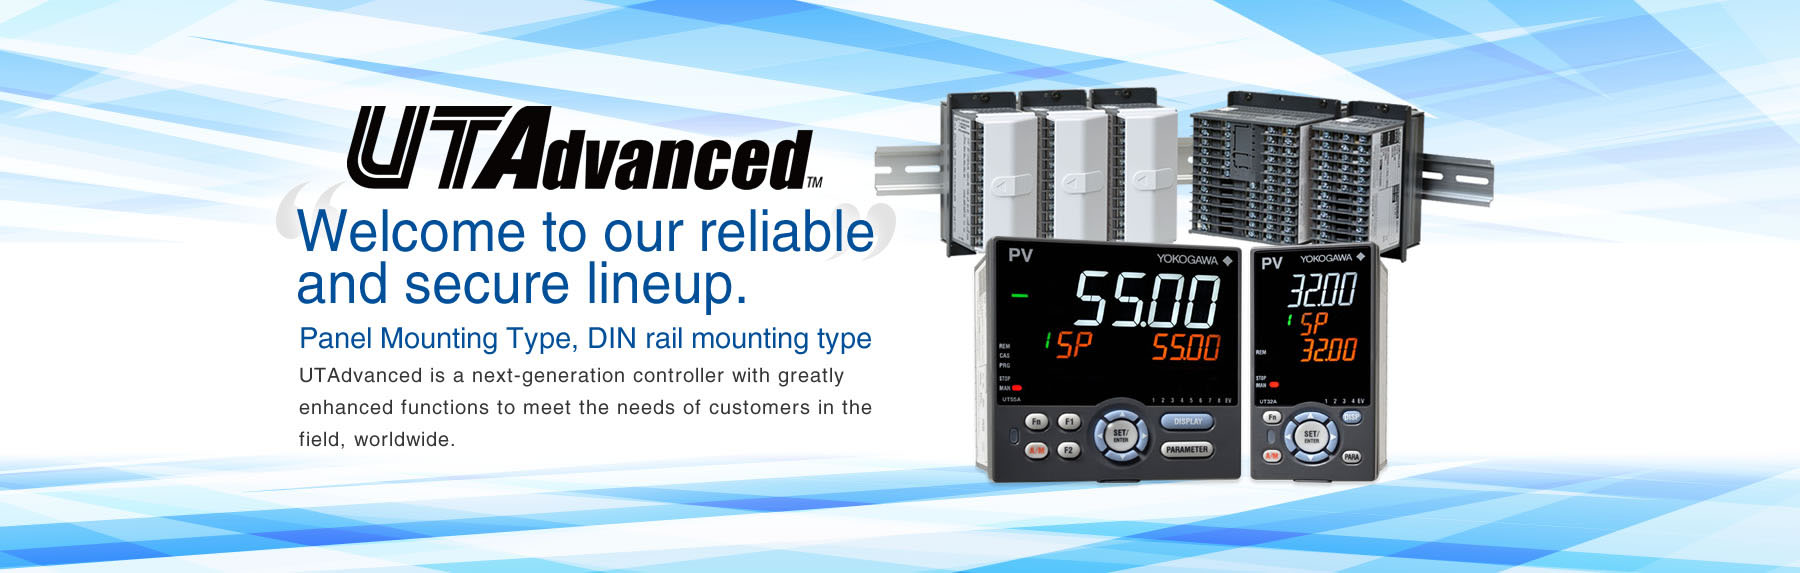 Welcome to our reliable and secure lineup. Panel Mounting Type, DIN rail mounting type. UTAdvanced is a next-generation controller with greatly enhanced functions to meet the needs of customers in the field, worldwide.